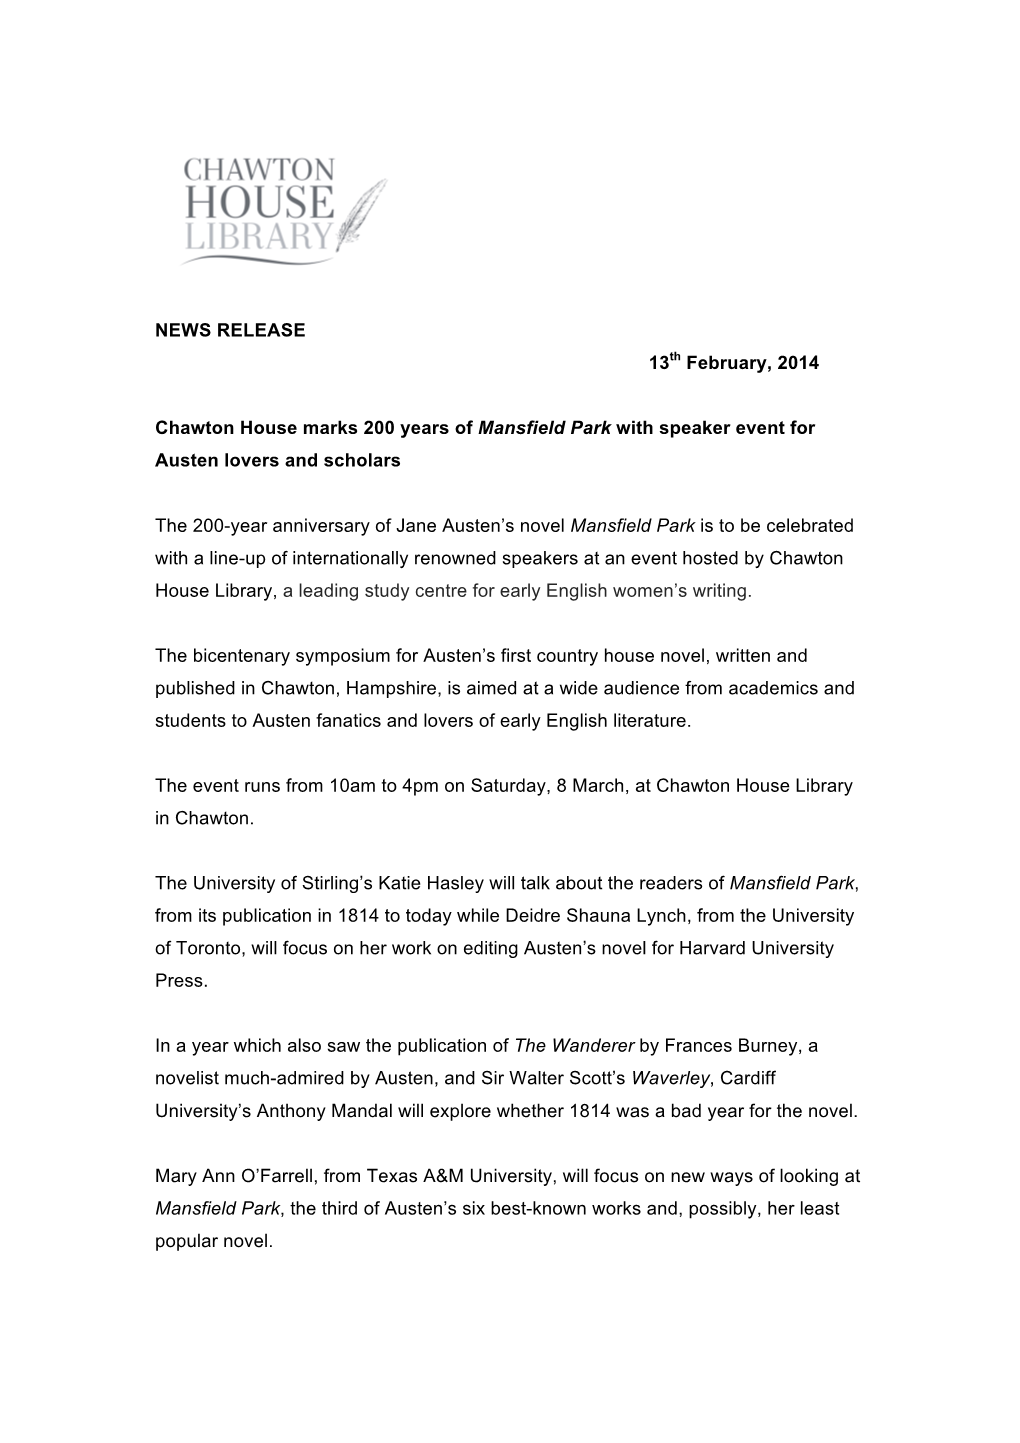 NEWS RELEASE 13Th February, 2014 Chawton House Marks 200 Years of Mansfield Park with Speaker Event for Austen Lovers and Schola